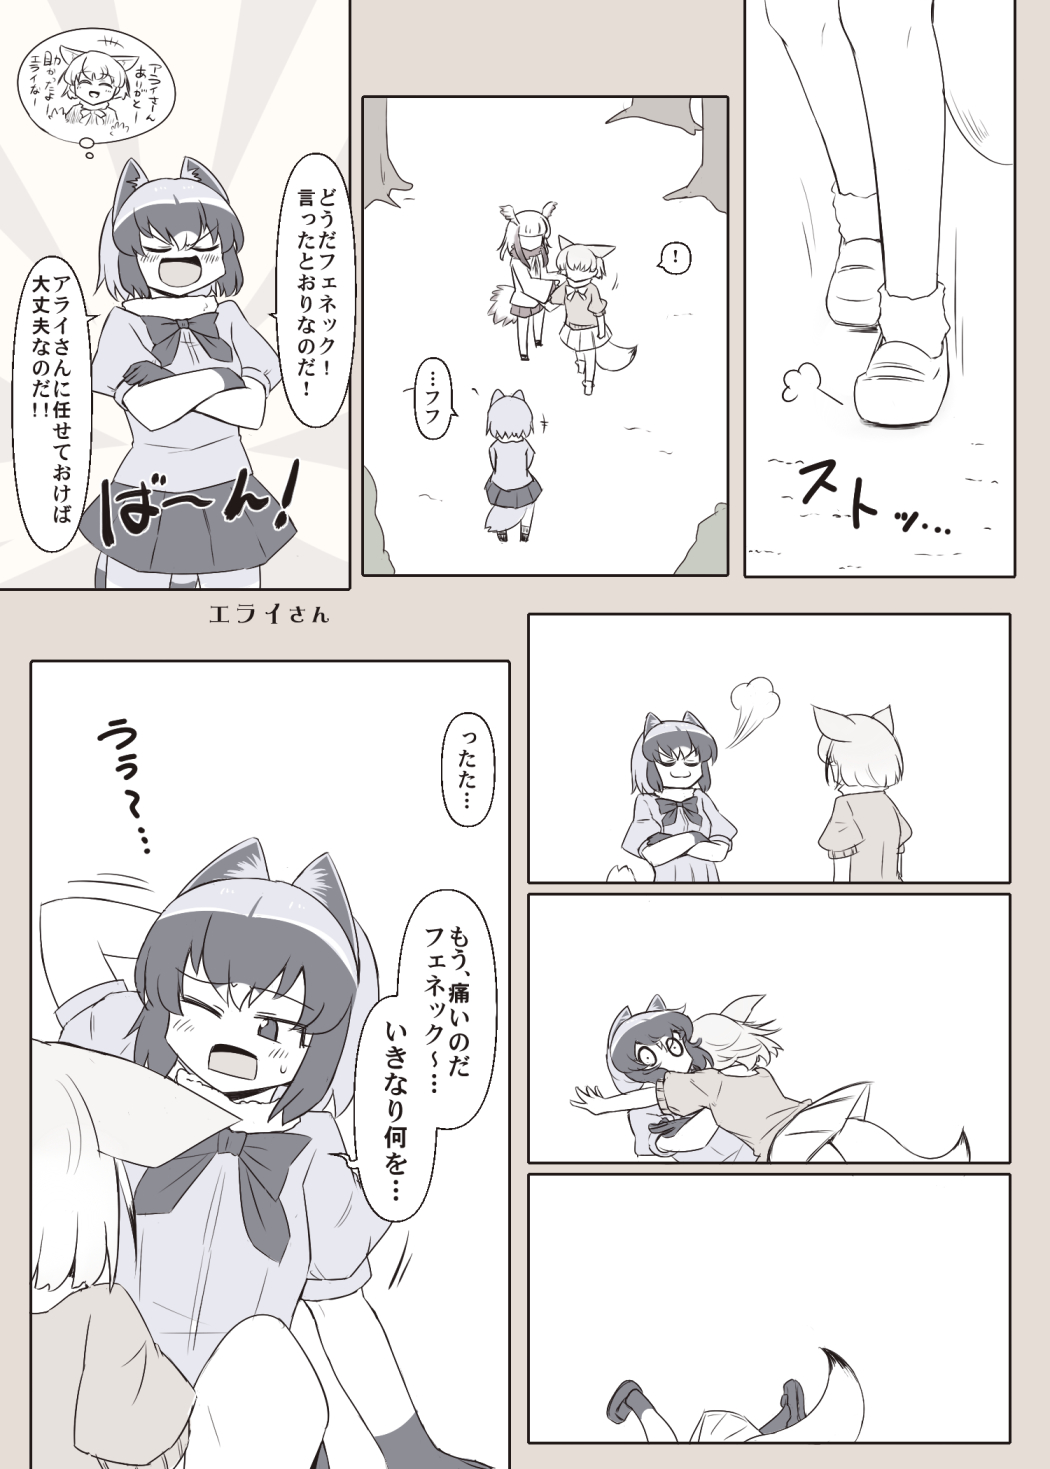 ! 3girls =3 animal_ears bird_tail bird_wings bow bowtie closed_eyes comic common_raccoon_(kemono_friends) crossed_arms eyebrows_visible_through_hair fennec_(kemono_friends) fox_ears fox_tail fur_collar glomp head_wings highres hug japanese_crested_ibis_(kemono_friends) kemono_friends multiple_girls open_mouth raccoon_ears raccoon_tail shiozaki16 short_sleeves skirt smile spoken_exclamation_mark standing striped_tail surprised sweater tail translation_request v-shaped_eyebrows wide-eyed wings |d